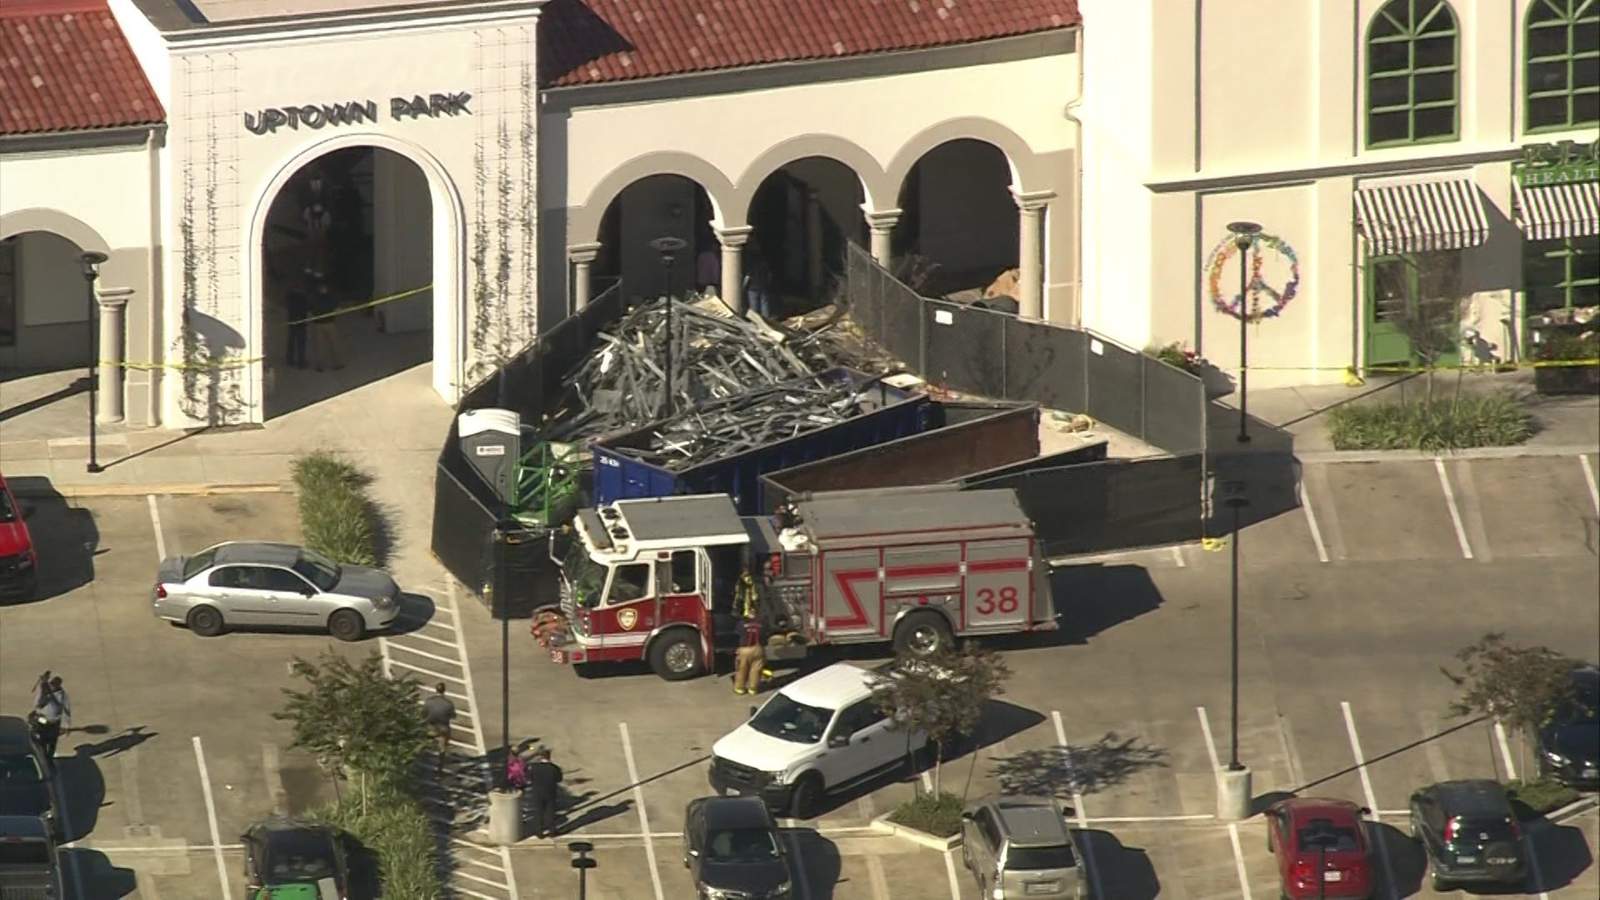 No injuries reported after explosion at popular shopping center in Galleria area, officials say